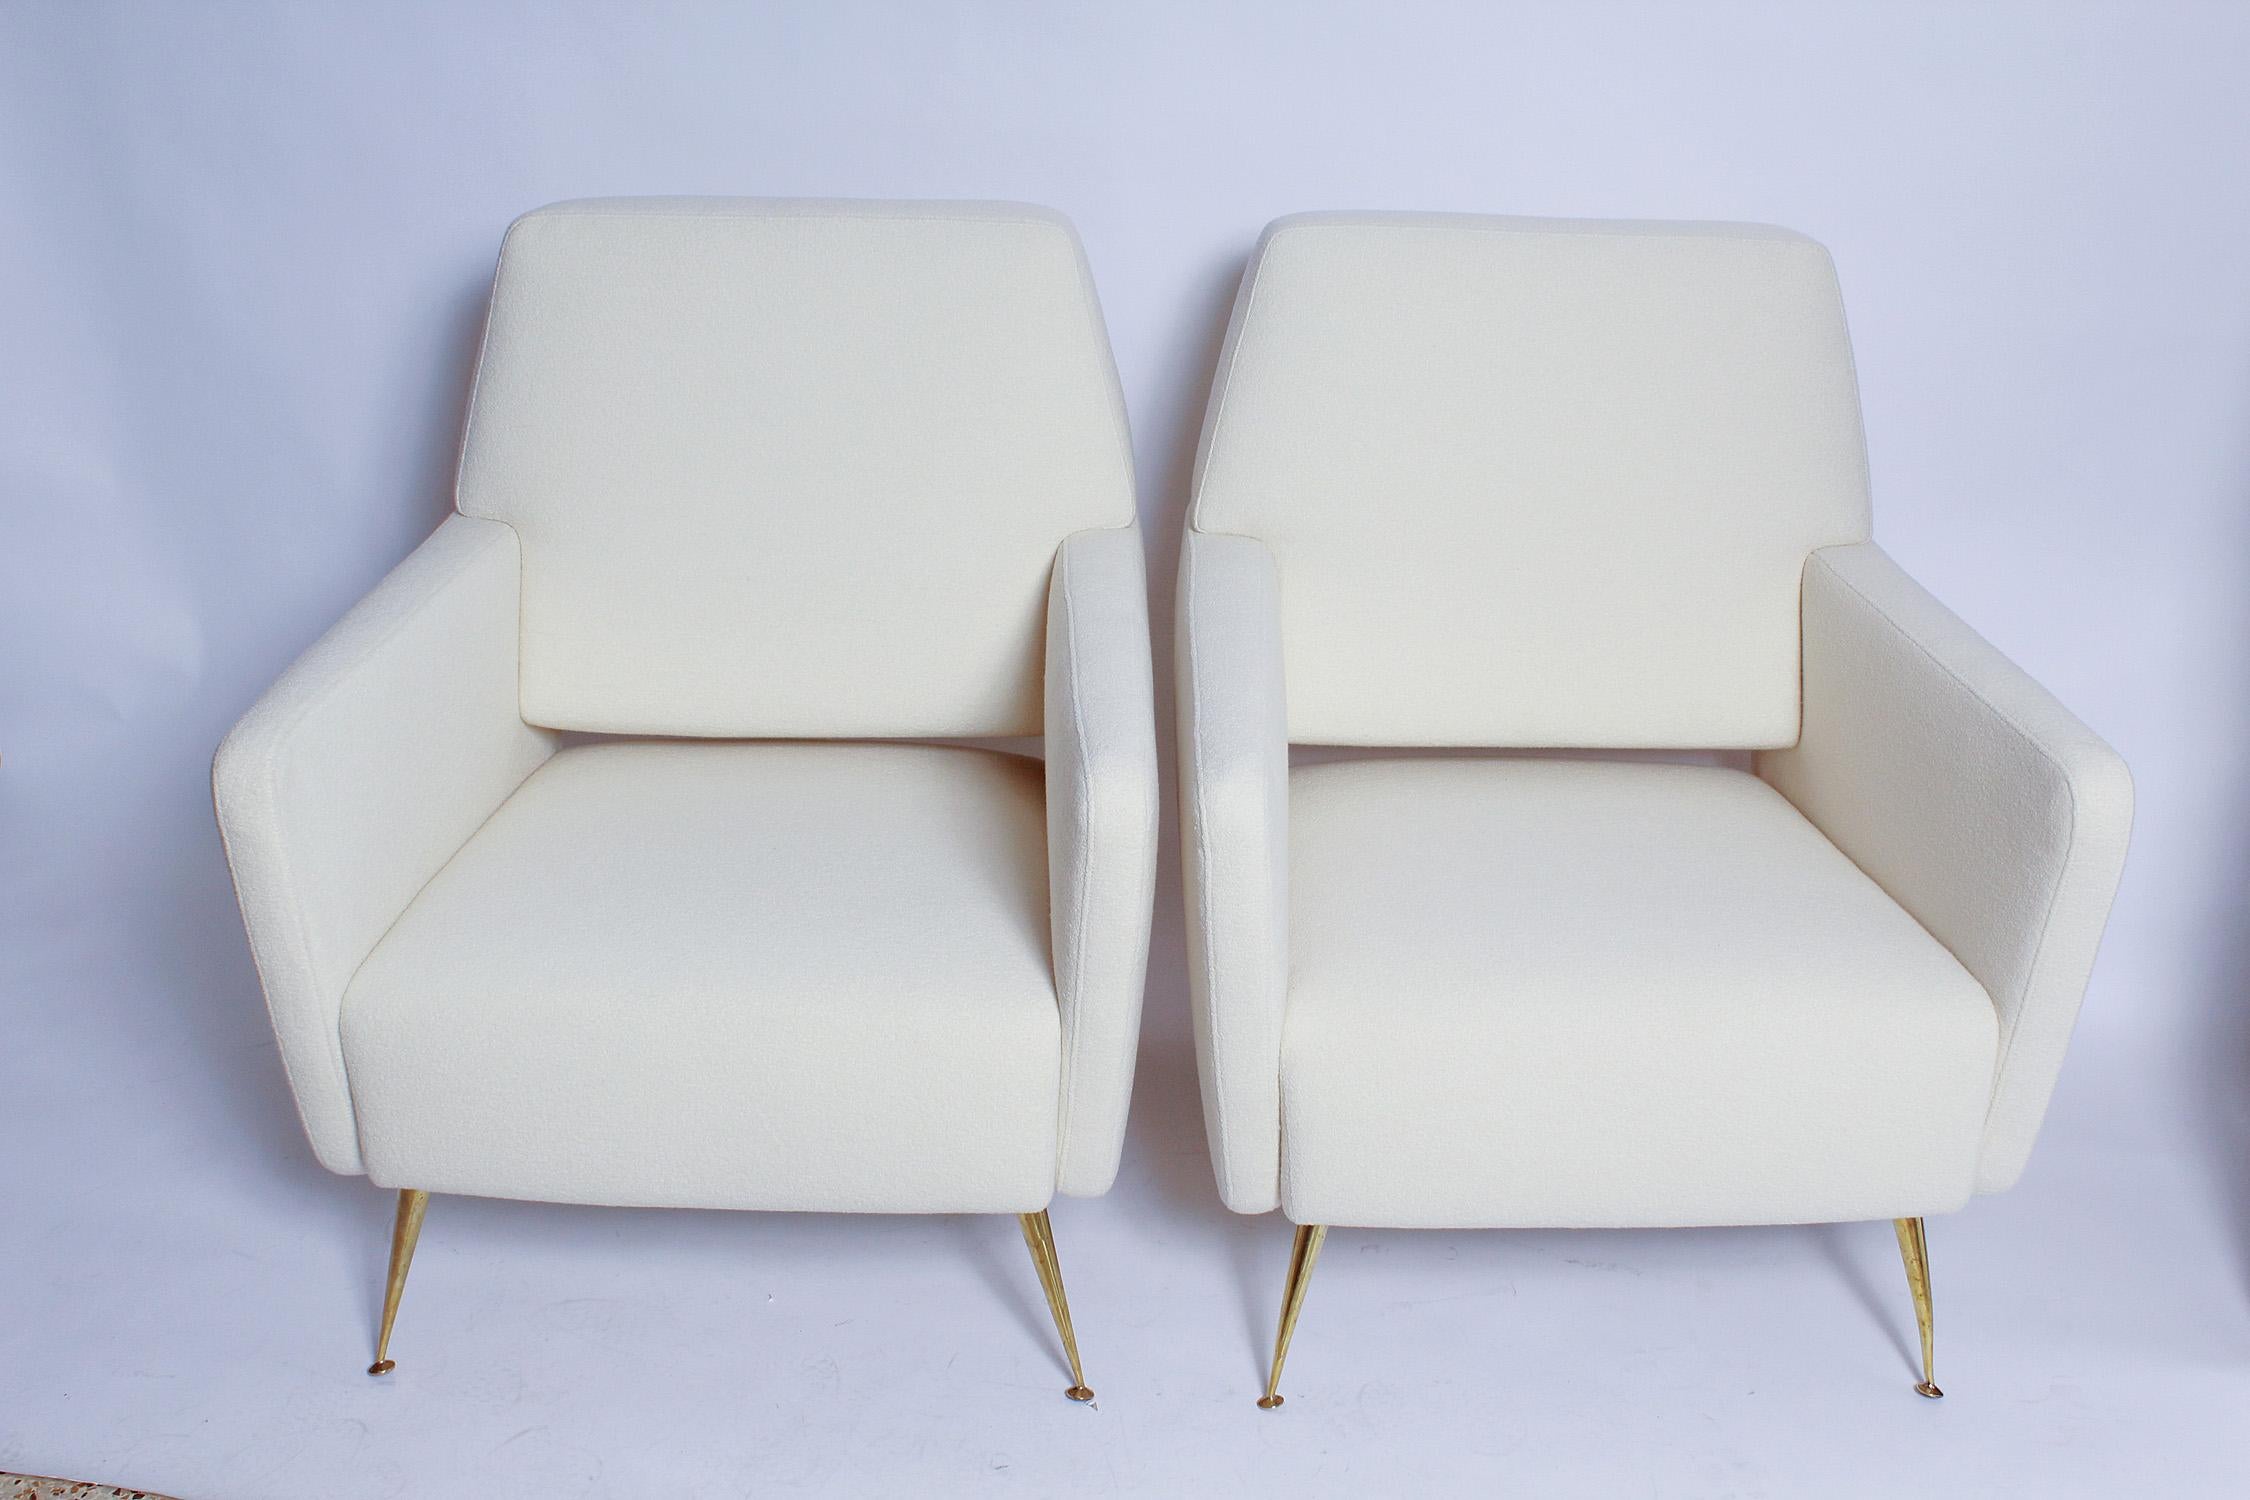 A super-chic pair of 1950s Italian Modernist lounge chairs, fully restored, with all new foam, polished brass legs, and Beacon Hill super-fine wool bouclé upholstery. We've lusted after these chairs ever since we spied them in a Parisian apartment